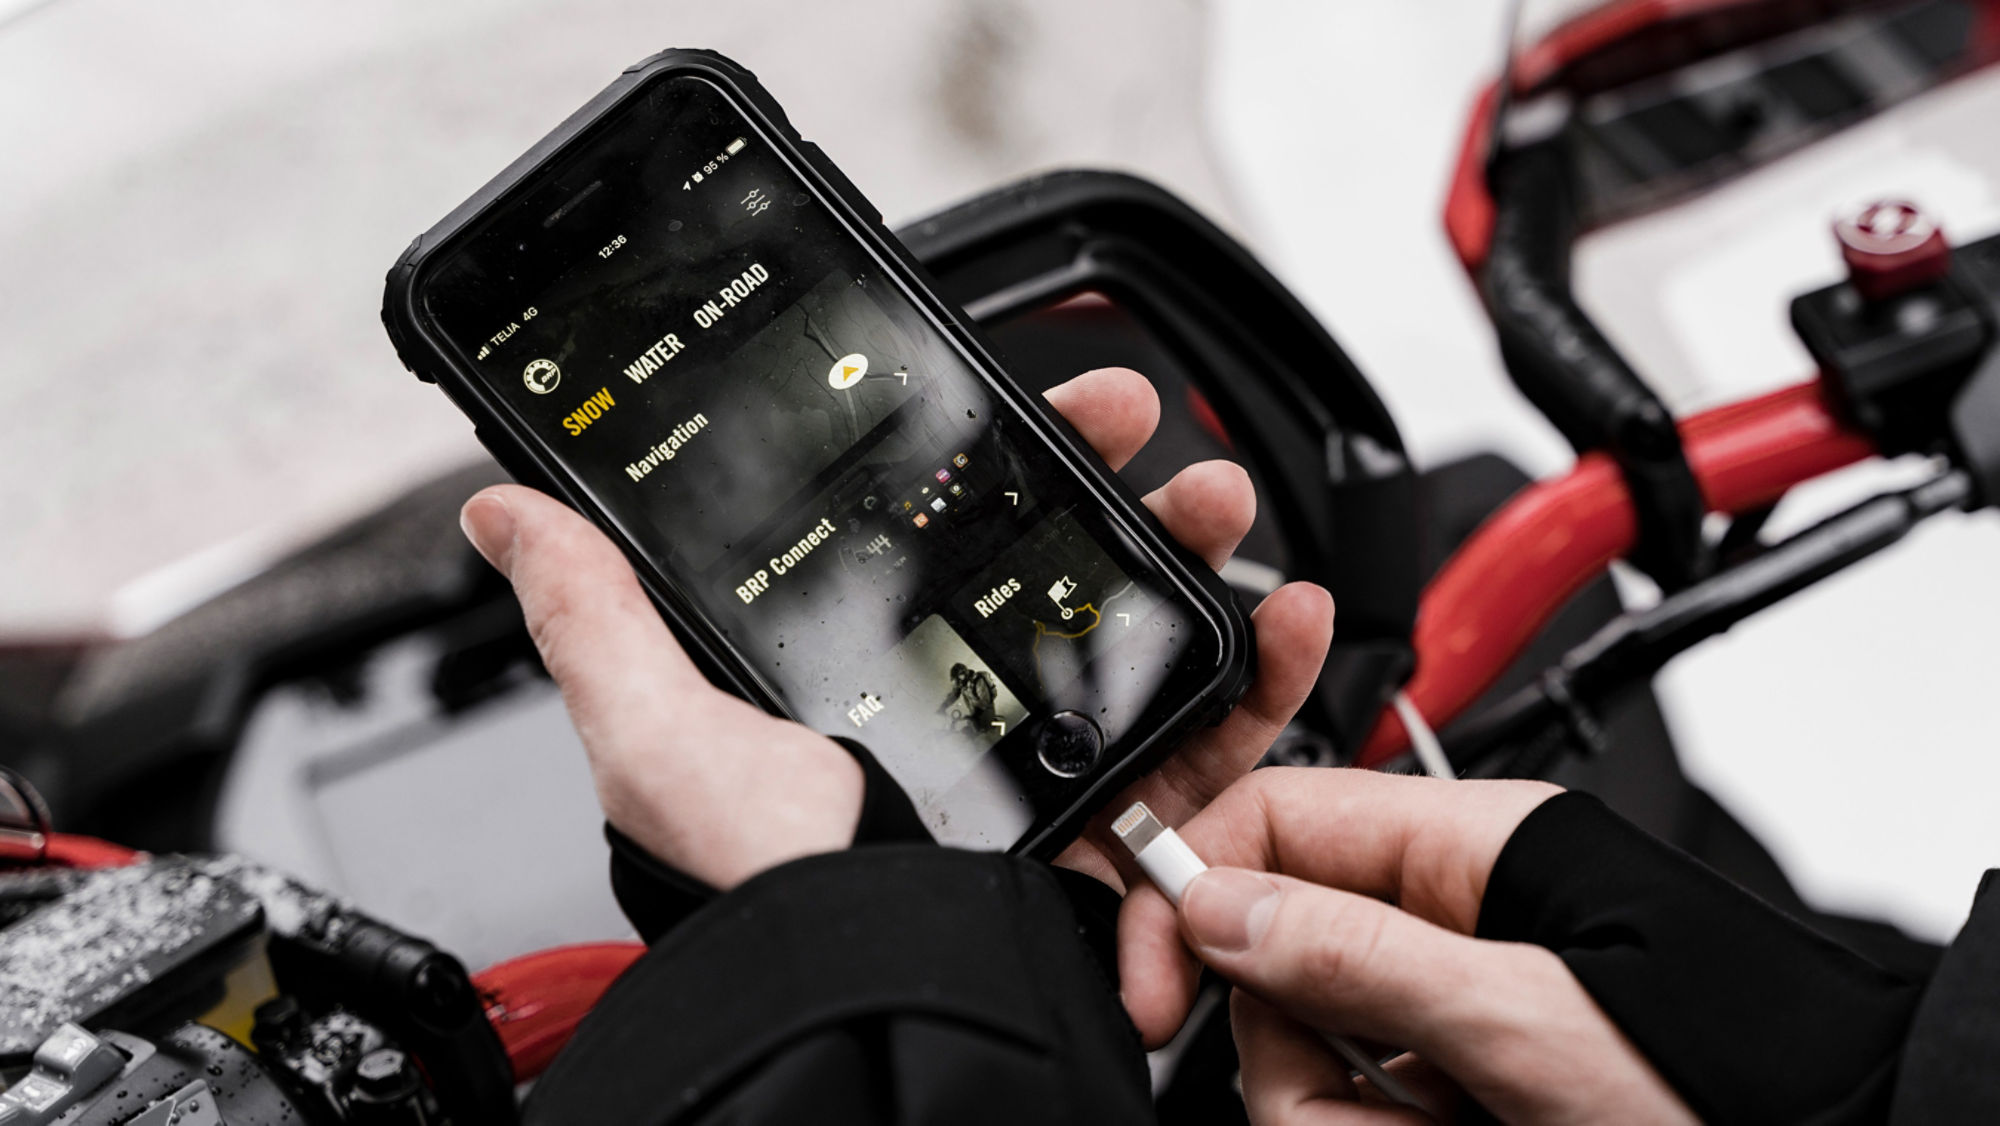 Rider attaching a charging cable to a mobile phone with BRP GO! App interface